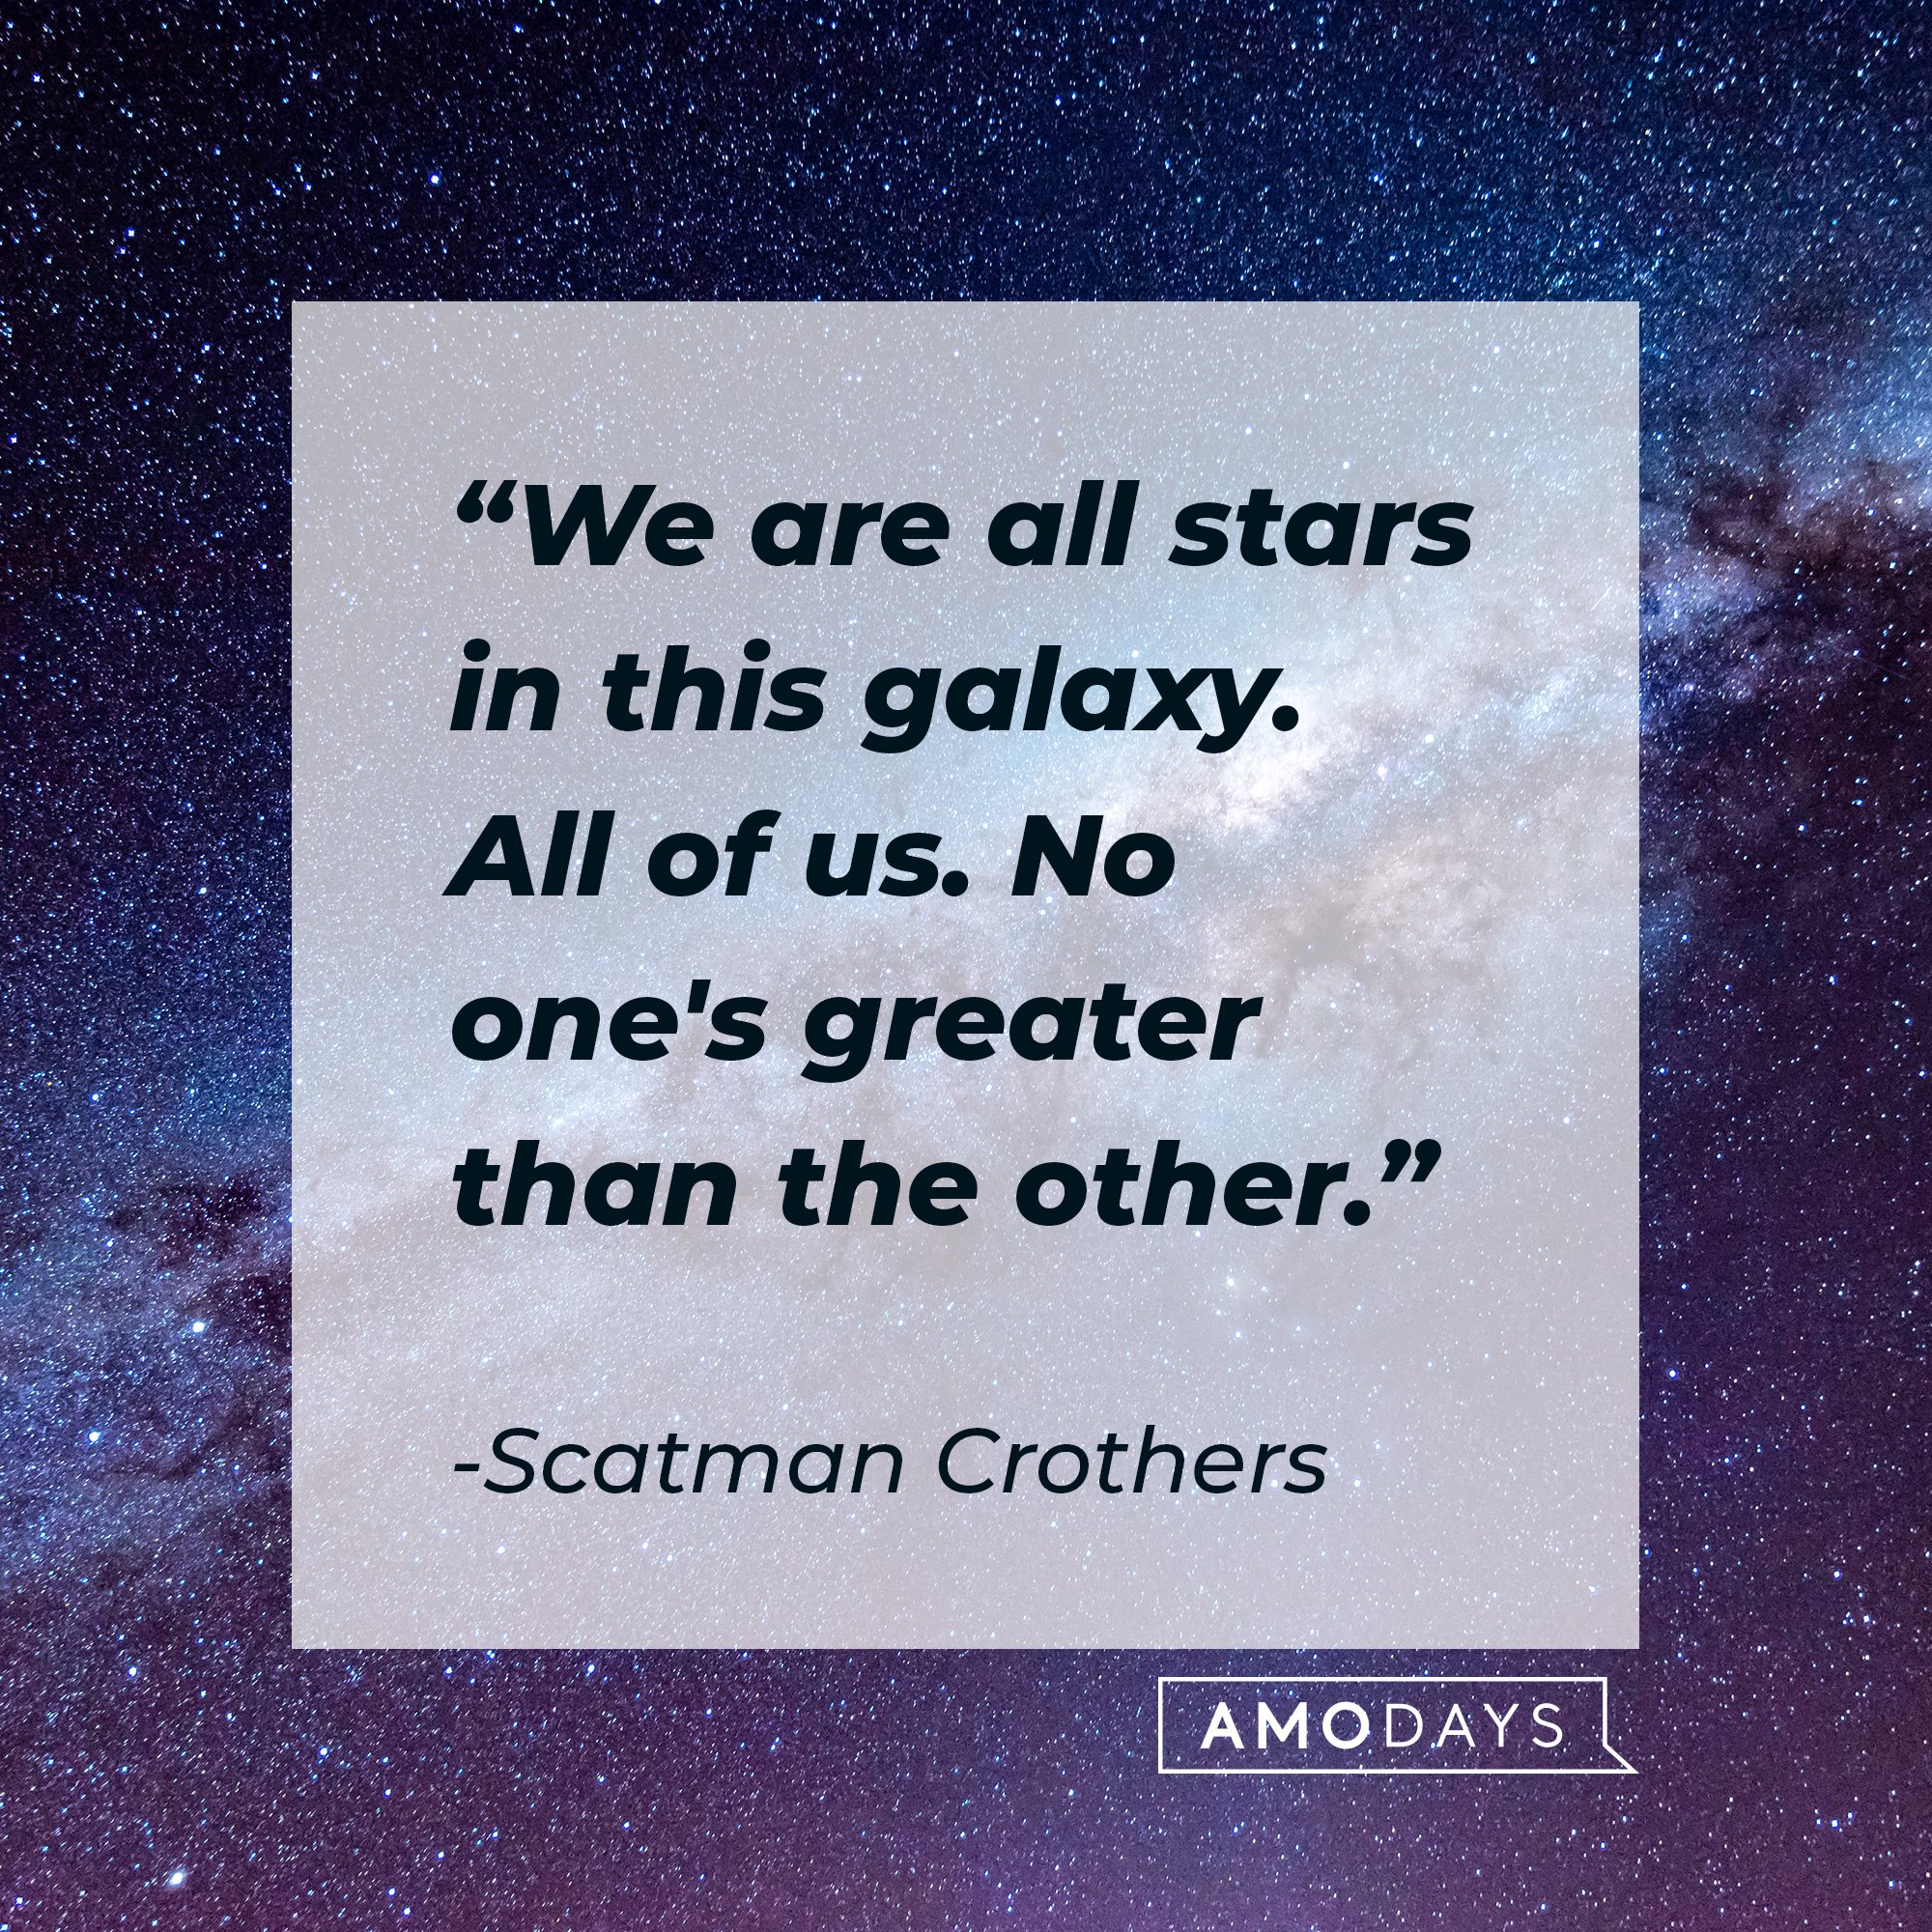 Scatman Crothers’s quote: "We are all stars in this galaxy. All of us. No one's greater than the other."  | Image: AmoDays